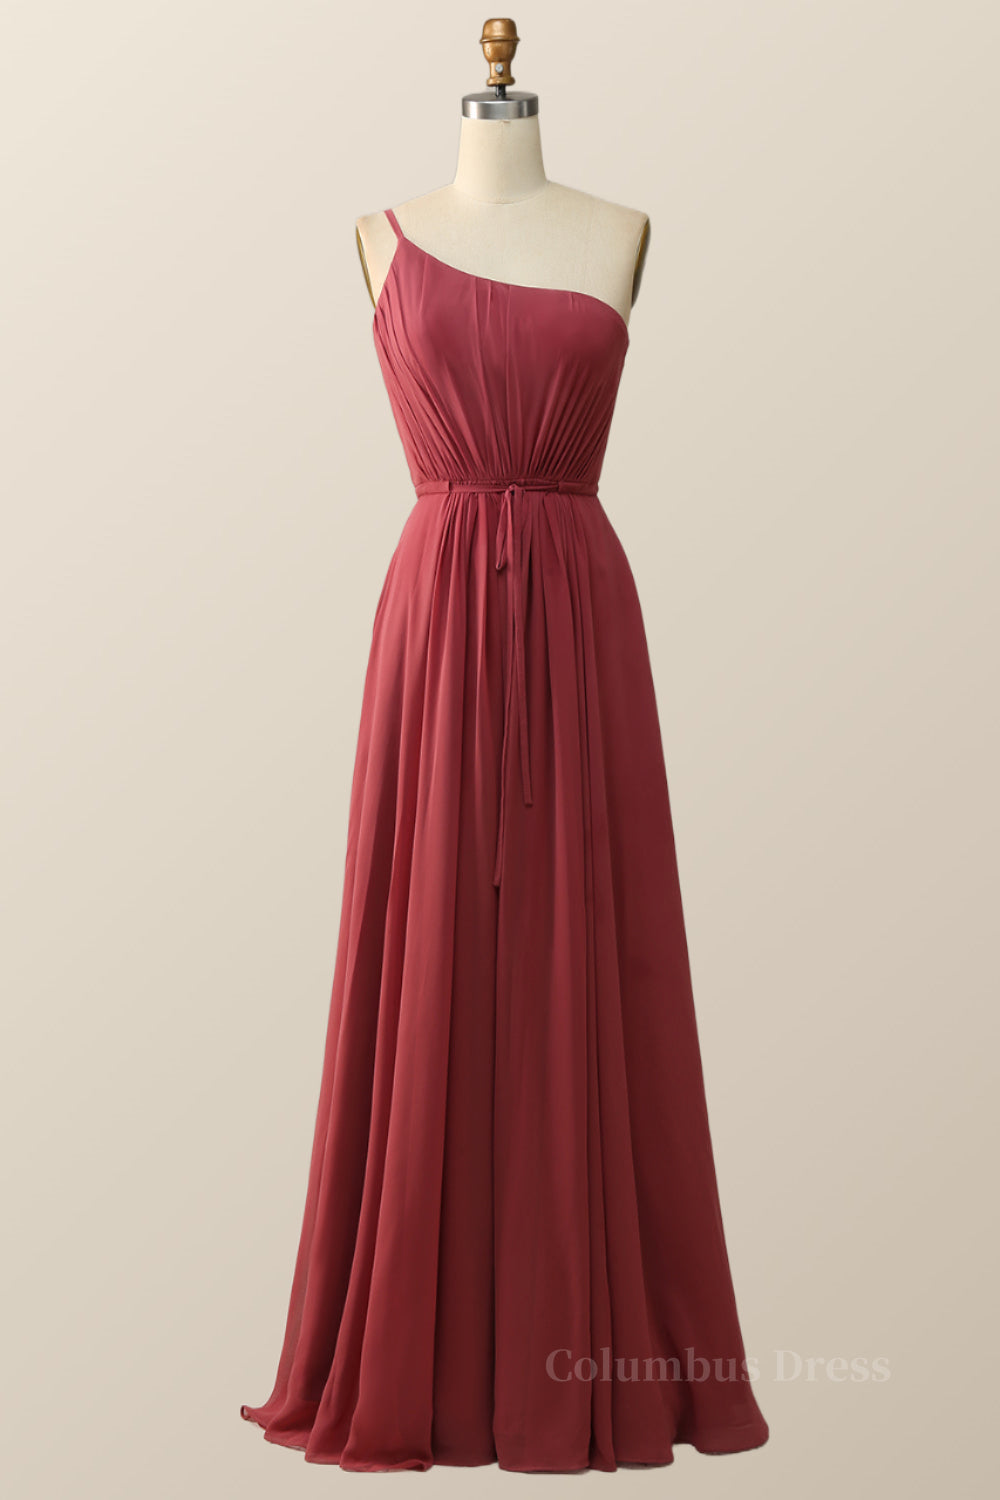 Prom Dress Long With Sleeves, One Shoulder Terracotta Chiffon Long Bridesmaid Dress